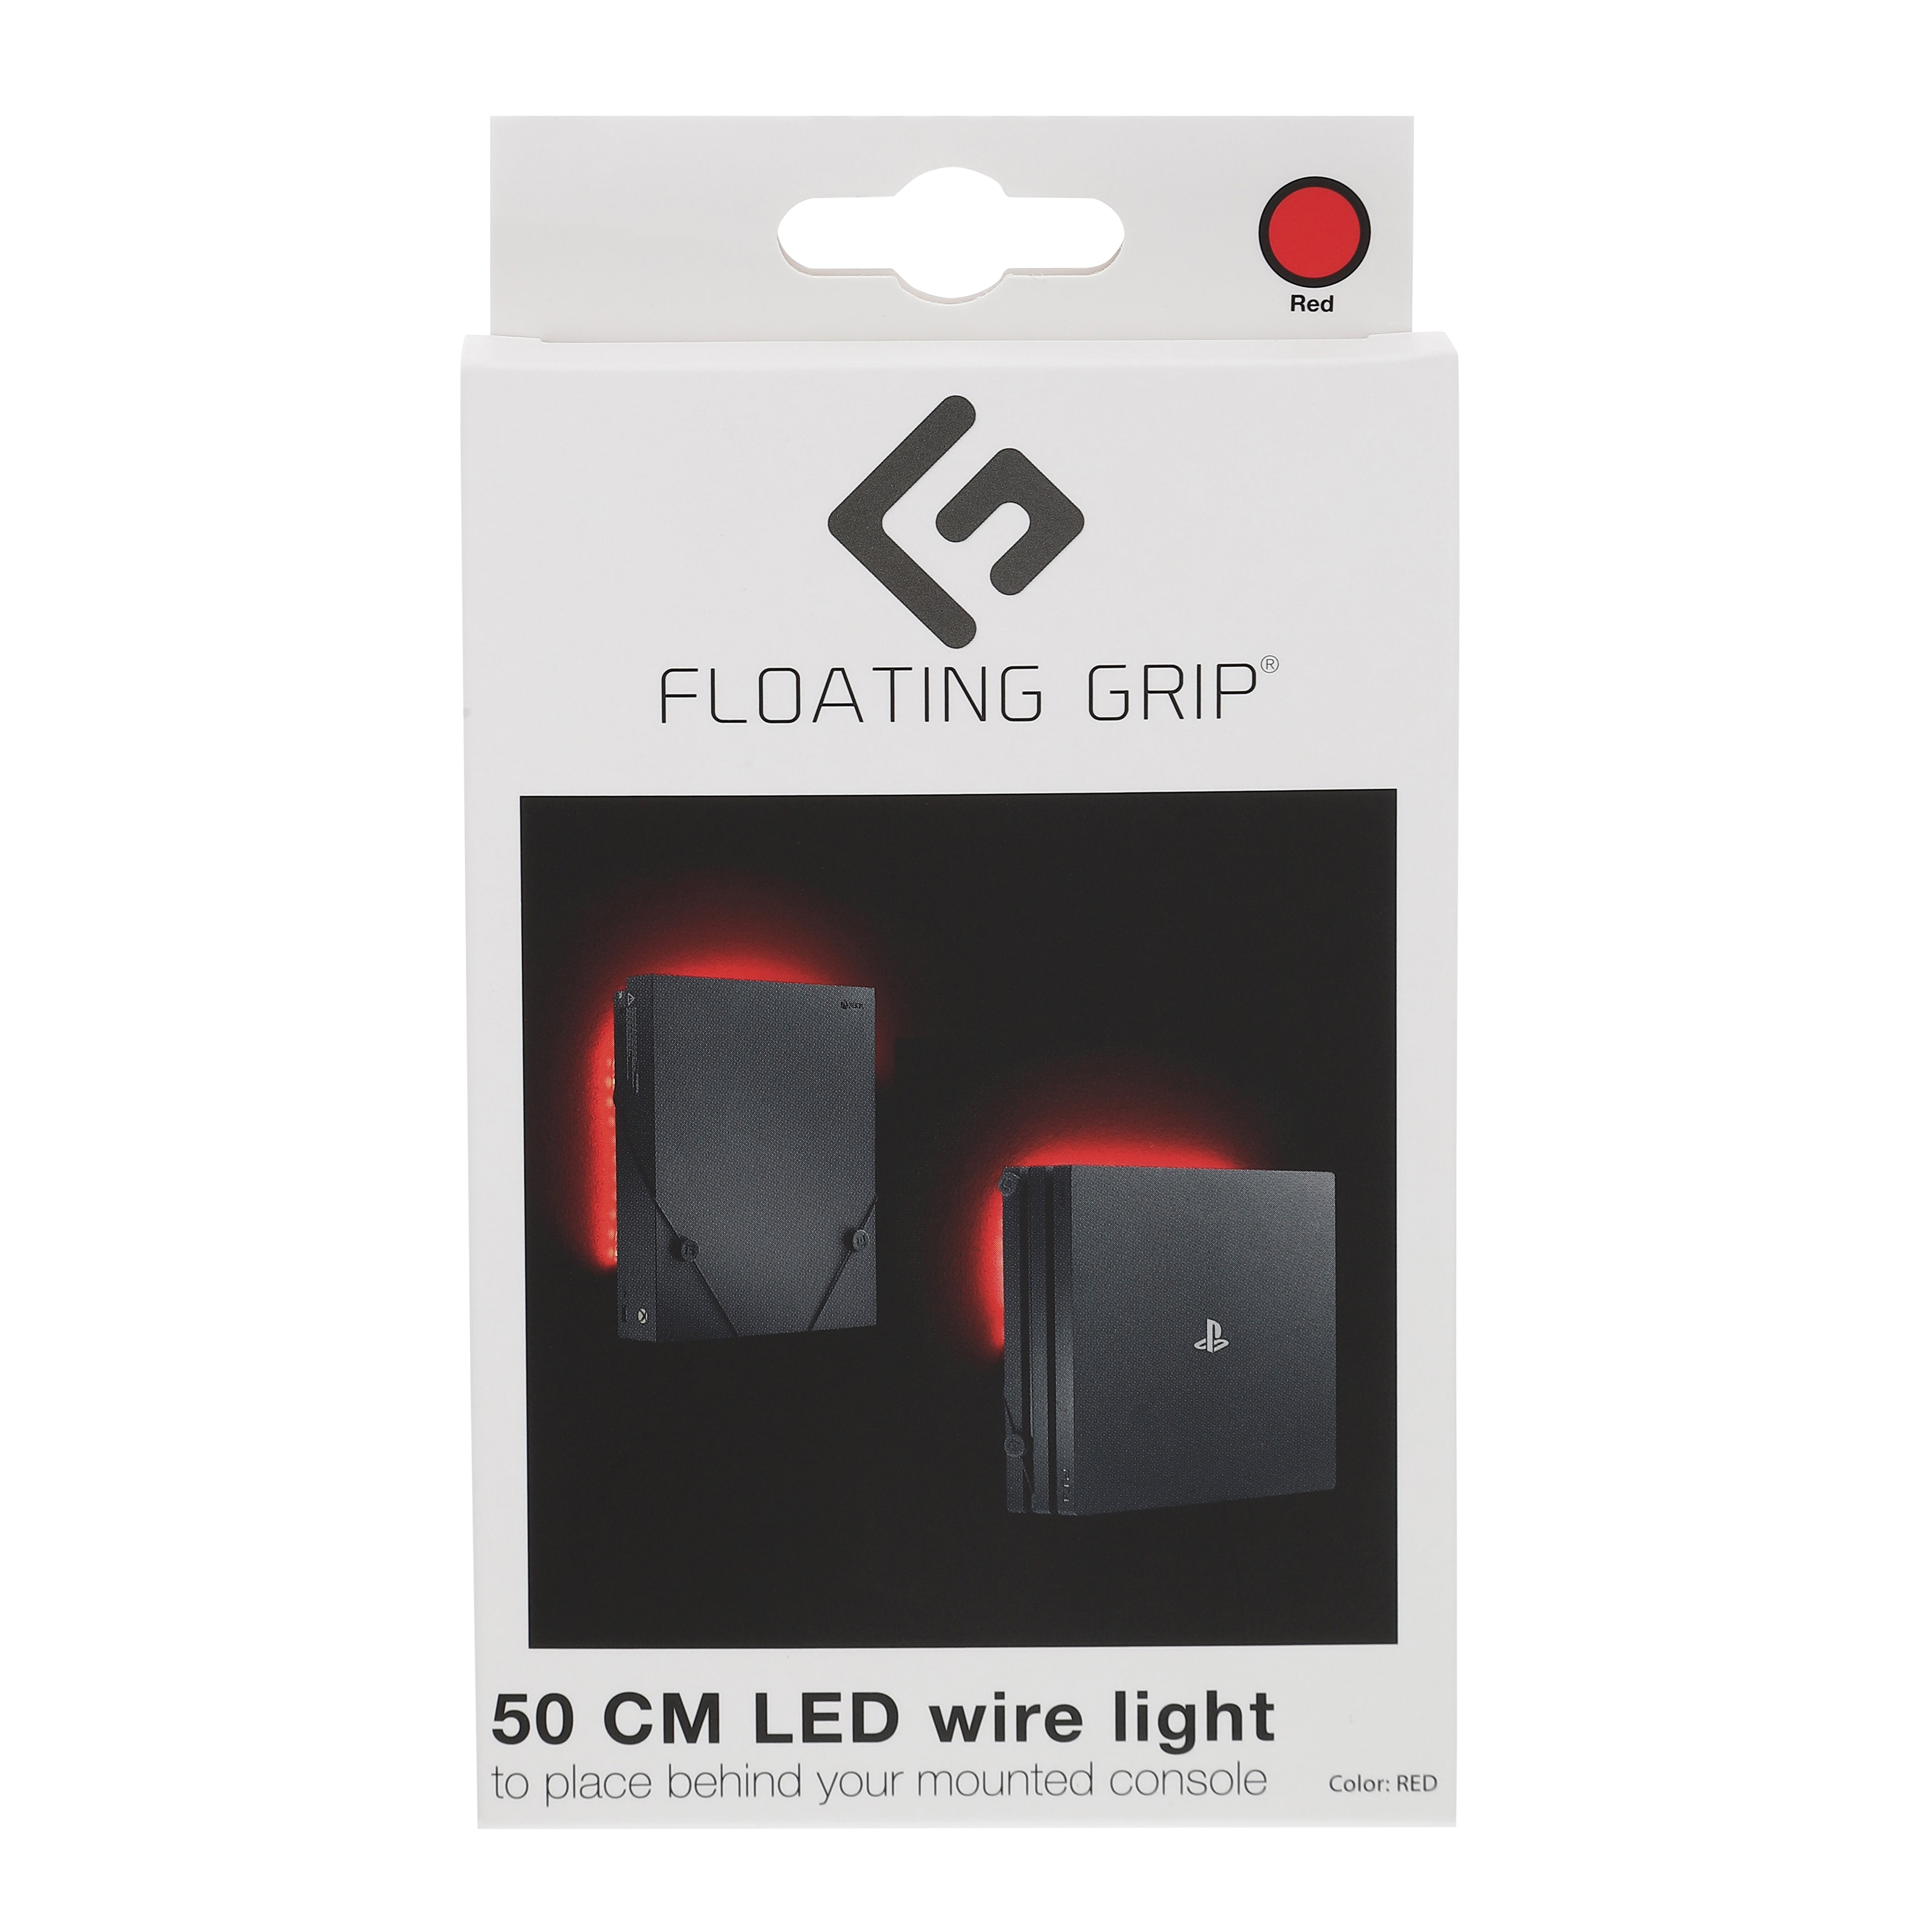 Floating Grip LED Wire Light